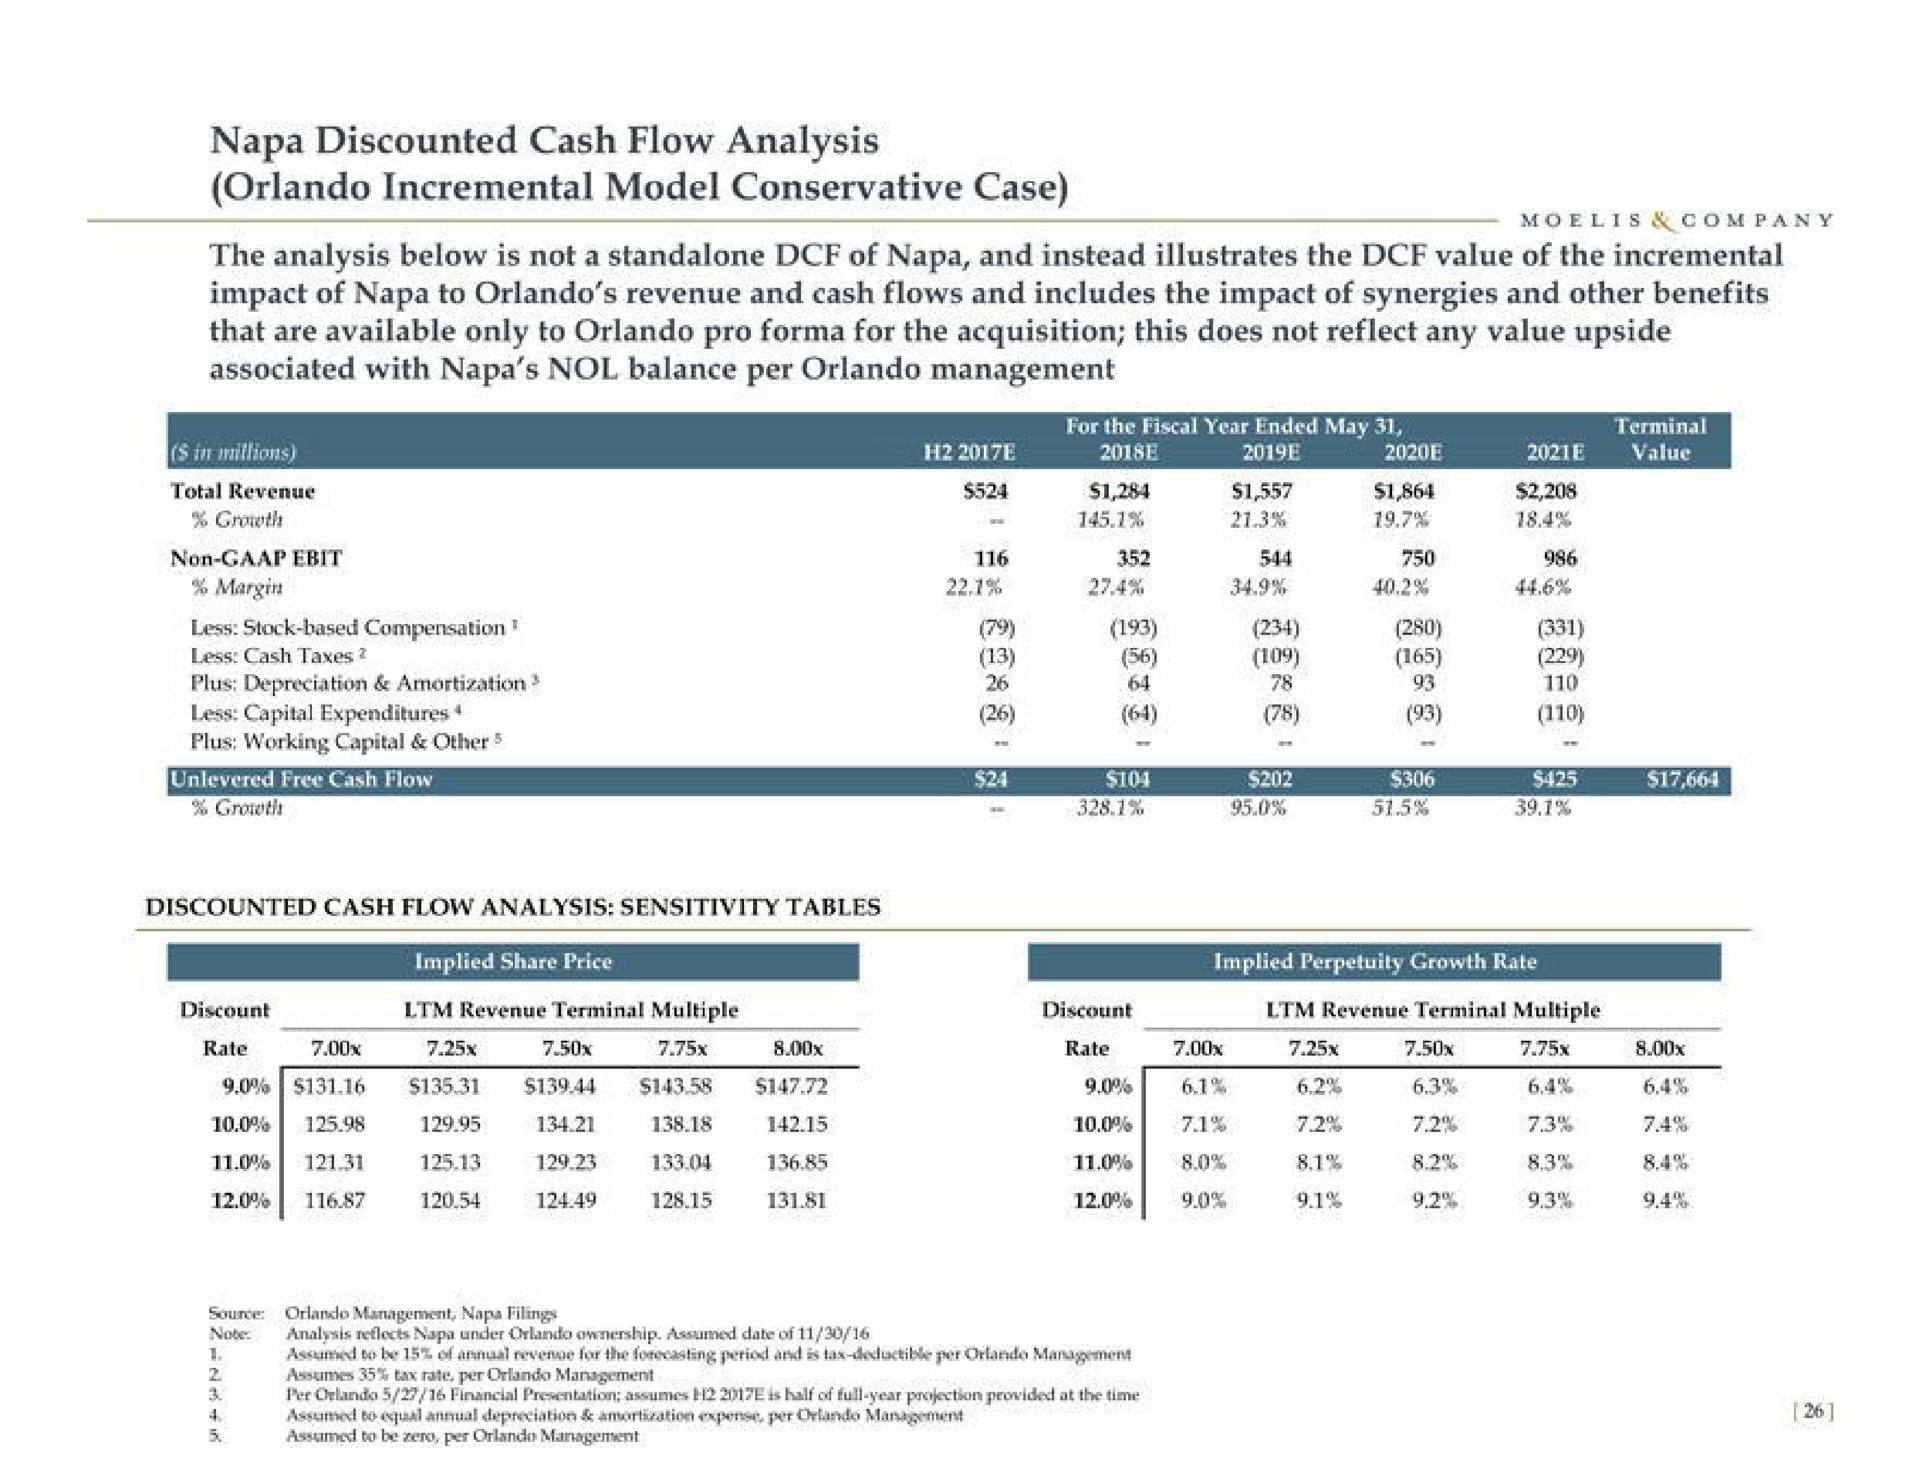 napa discounted cash flow analysis incremental model conservative case the analysis below is not a of napa and instead illustrates the value of the incremental impact of napa to revenue and cash flows and includes the impact of synergies and other benefits the | Moelis & Company